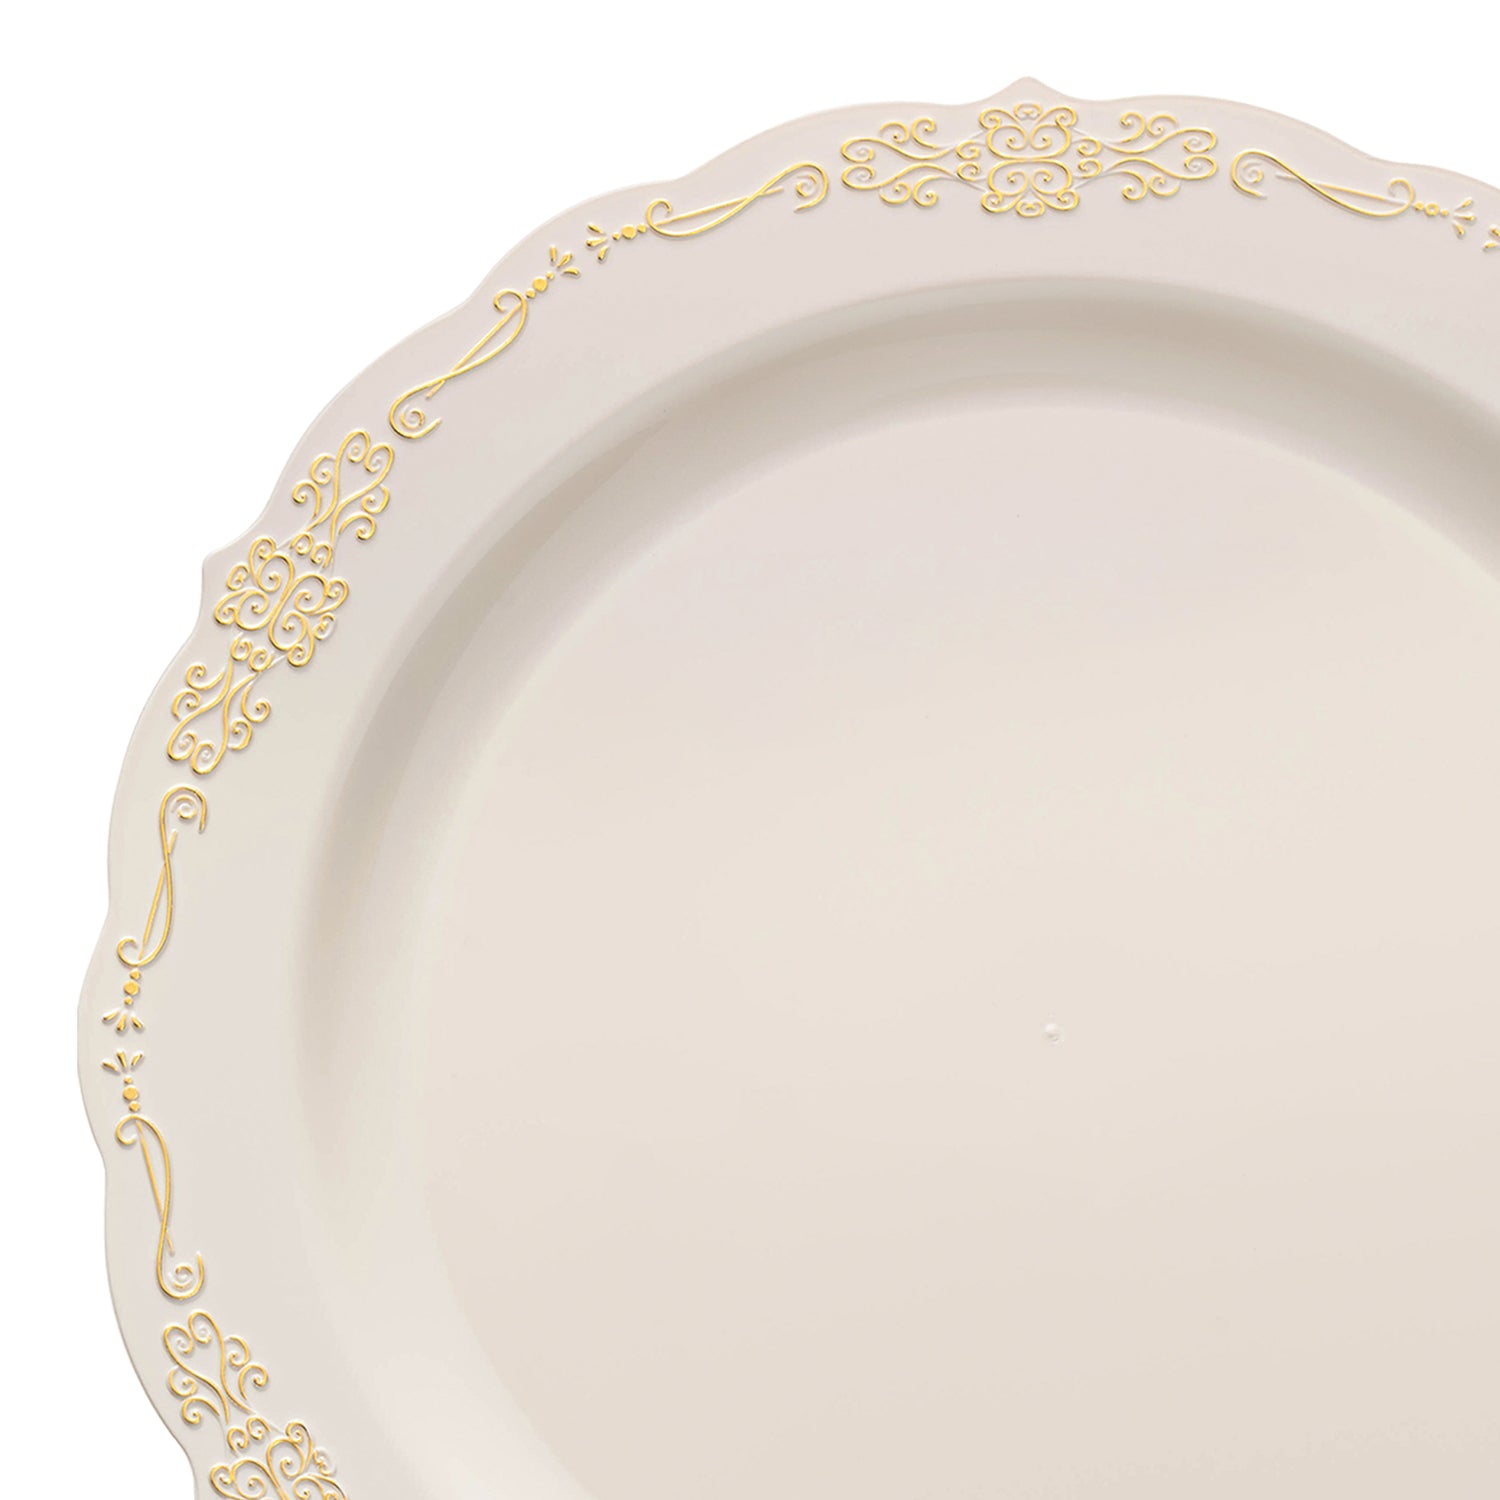 Ivory with Gold Vintage Rim Round Disposable Plastic Appetizer/Salad Plates (7.5") | The Kaya Collection